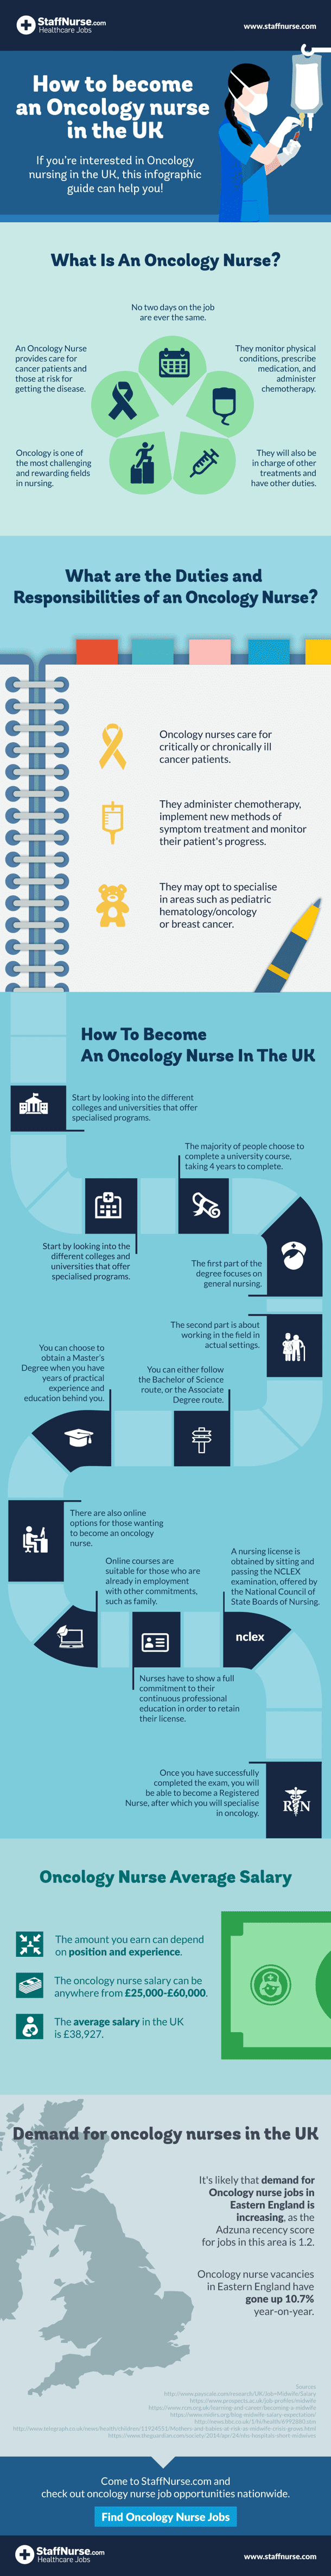 Healthcare infographic: how to become an oncology nurse in the UK